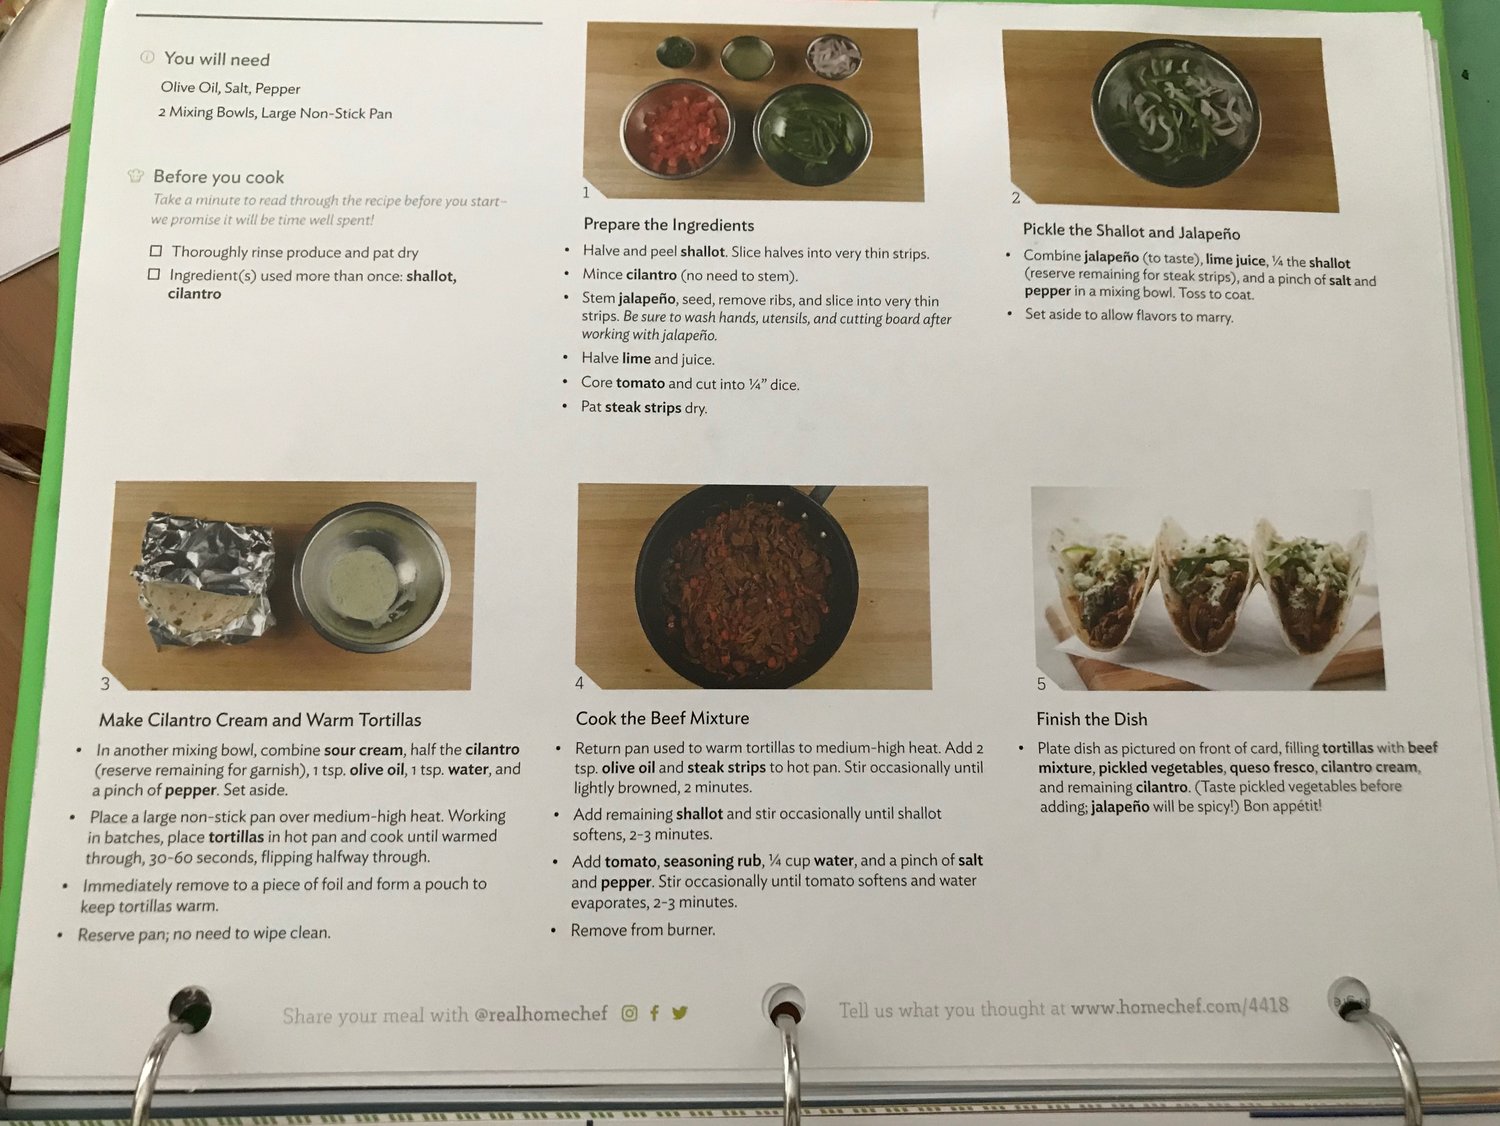 recipe card from Home Chef